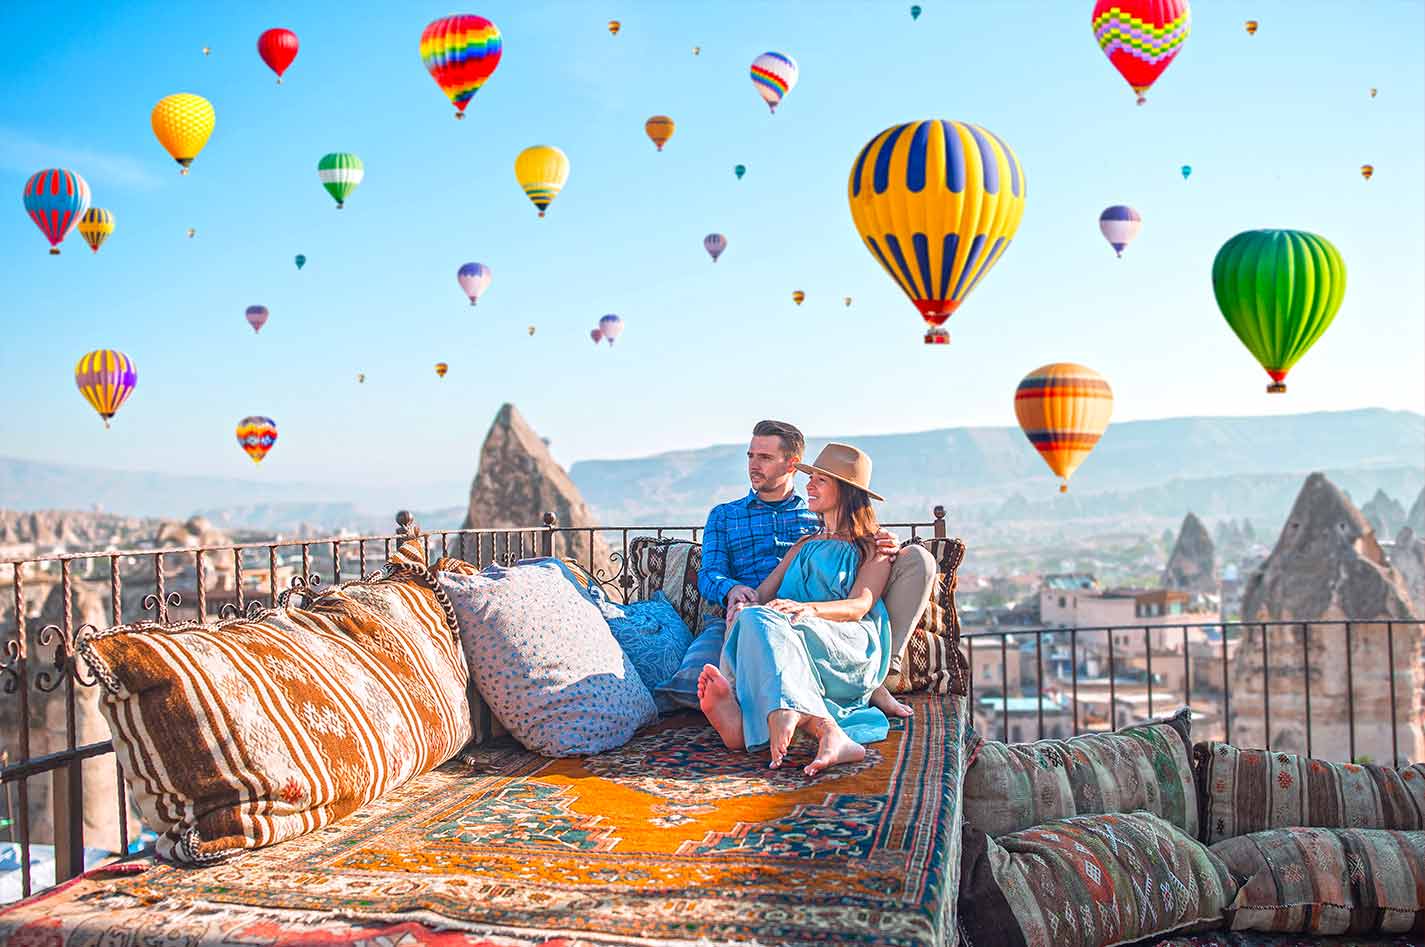 What are the 5 things to do in Cappadocia